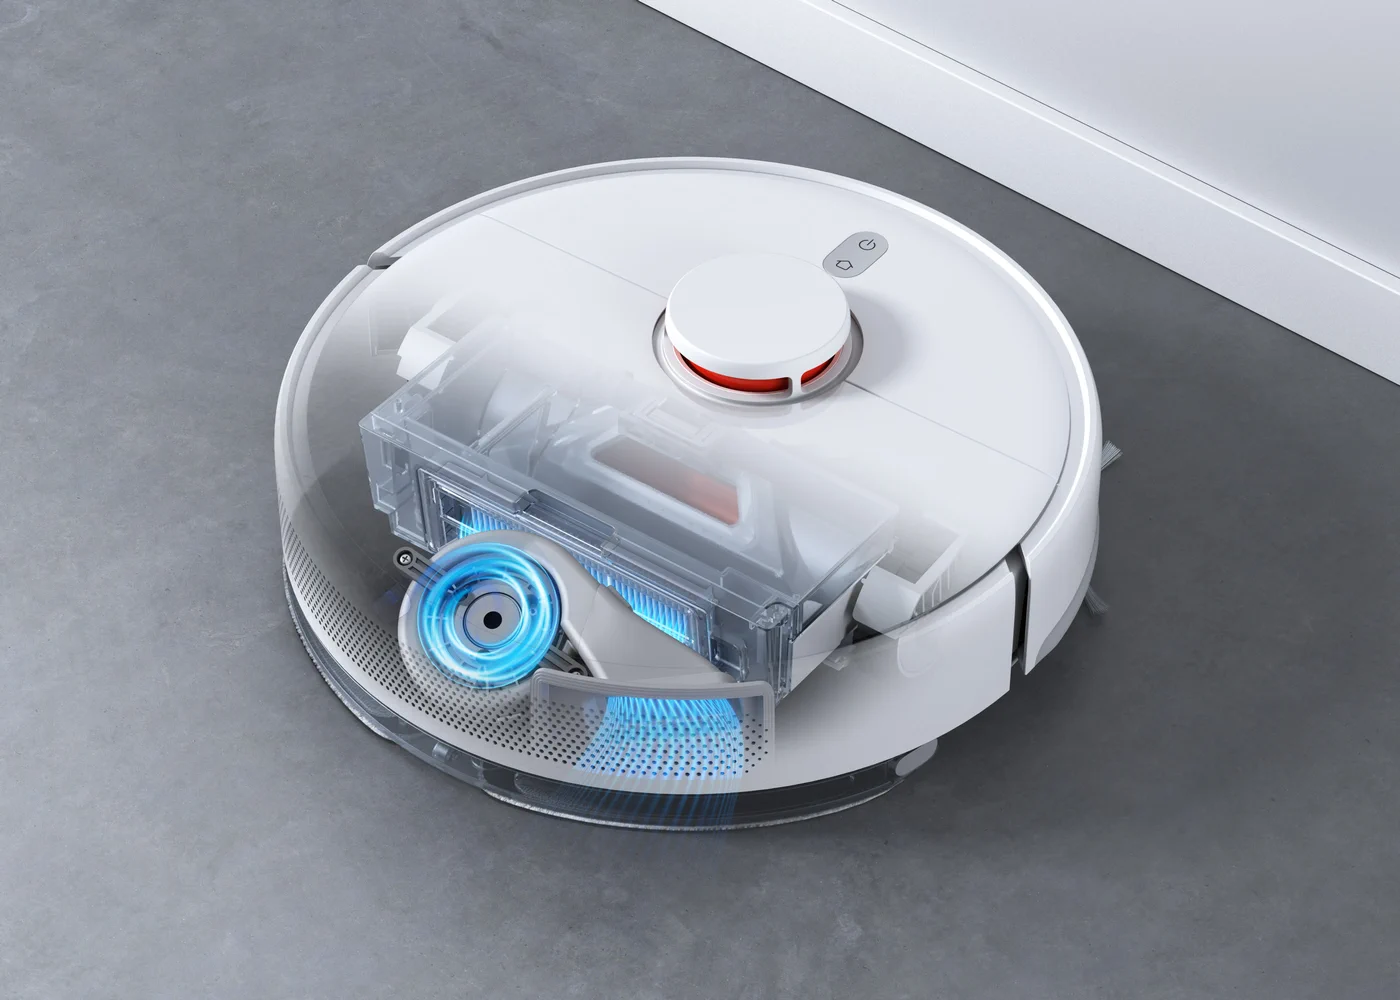  Xiaomi Robot Vacuum X10+, Wiping Function & All-in-One Station  (4000Pa Suction Power; Up to 120 min Battery Life; Auto. Self-Cleaning,  Emptying, Drying & Water refilling; app/Control), White